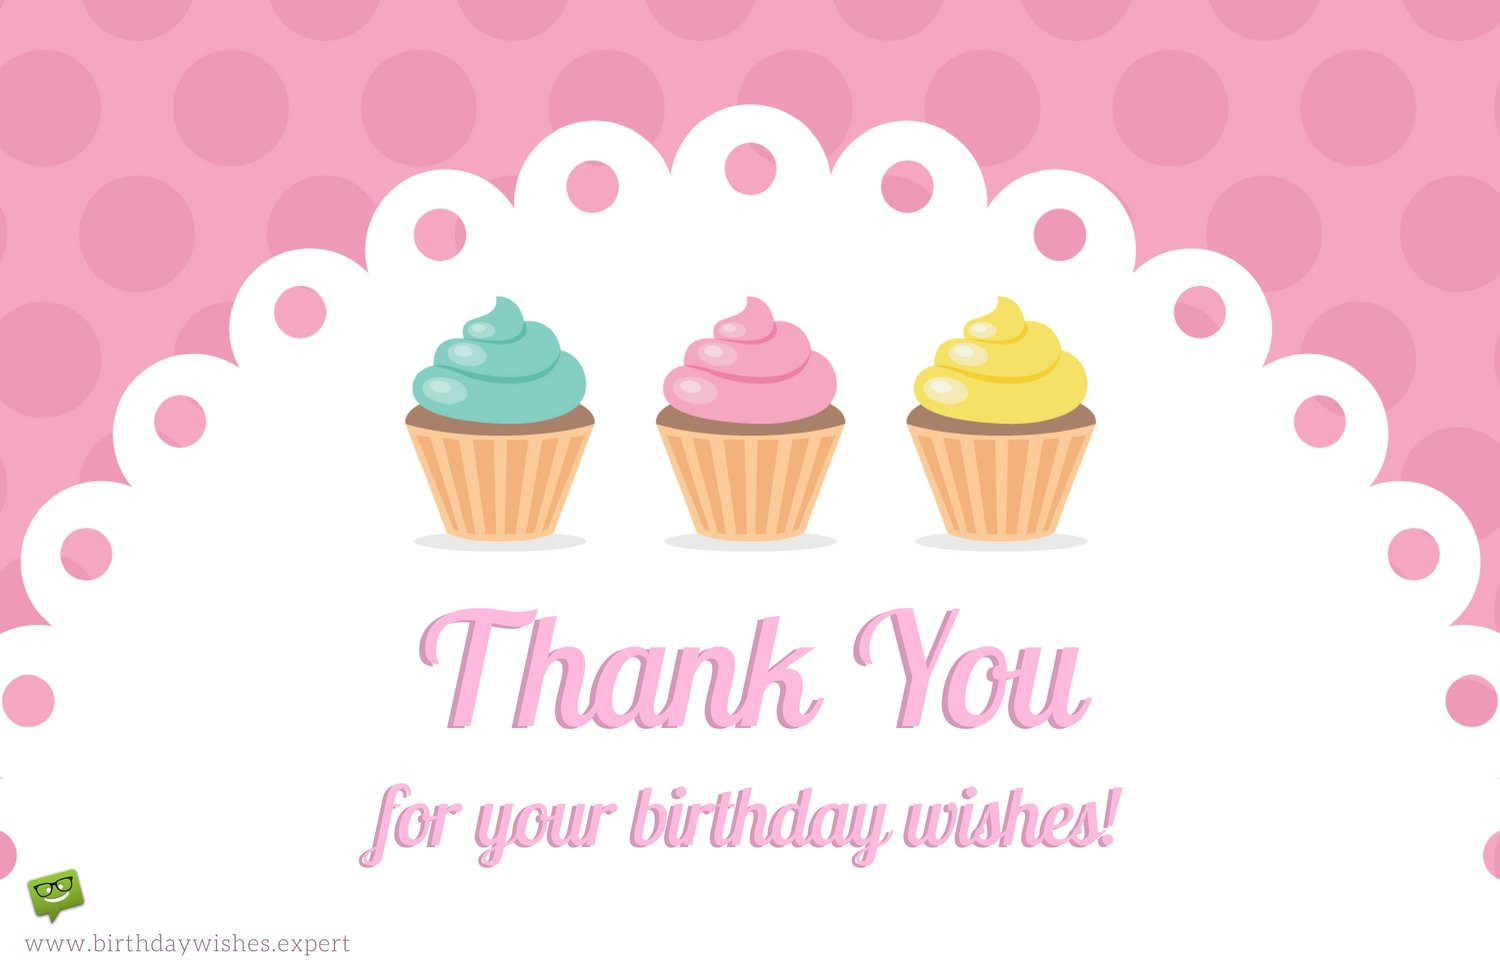 Birthday Wishes Thank You Note
 Thank You Notes for Your Birthday Wishes